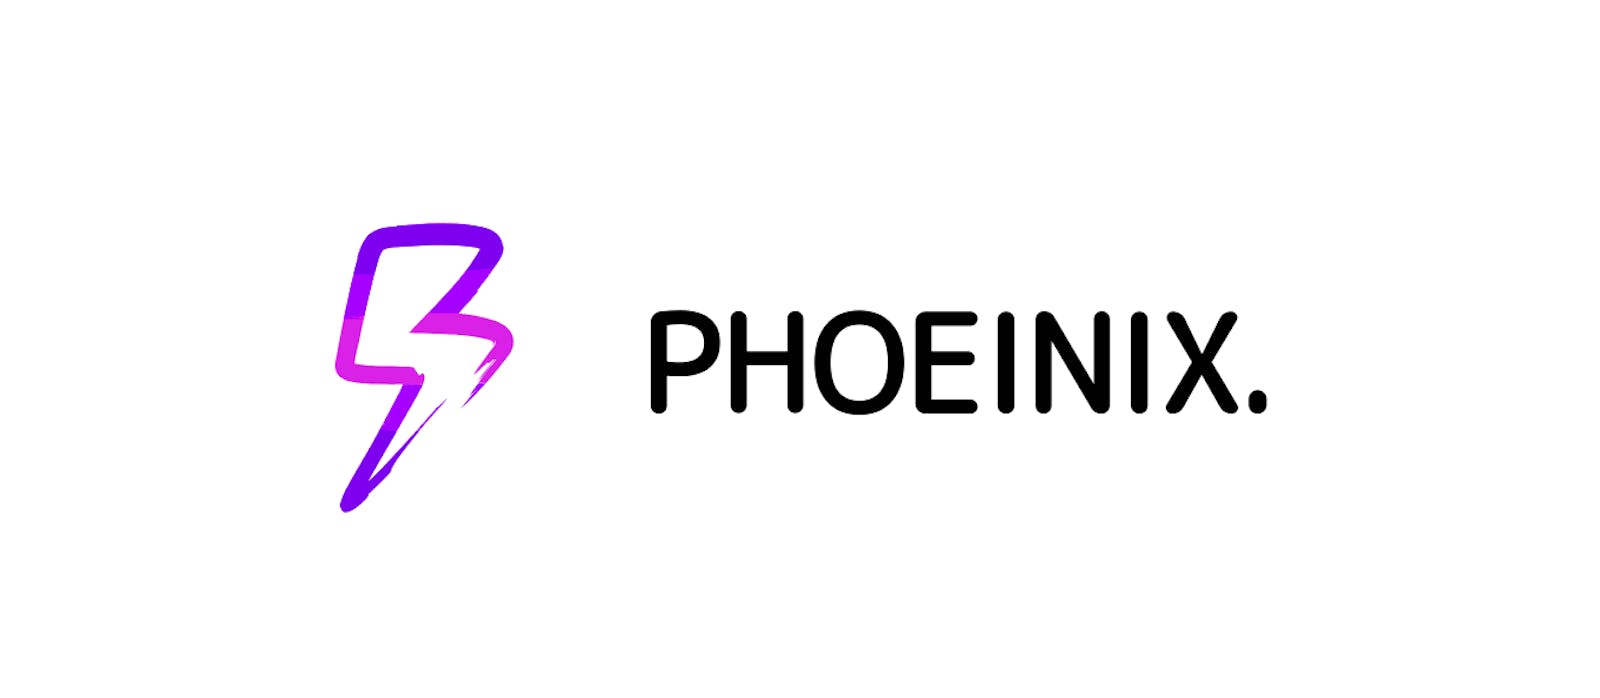 Presenting PHOEINIX - The Expense Tracker Appwrite hackathon submission